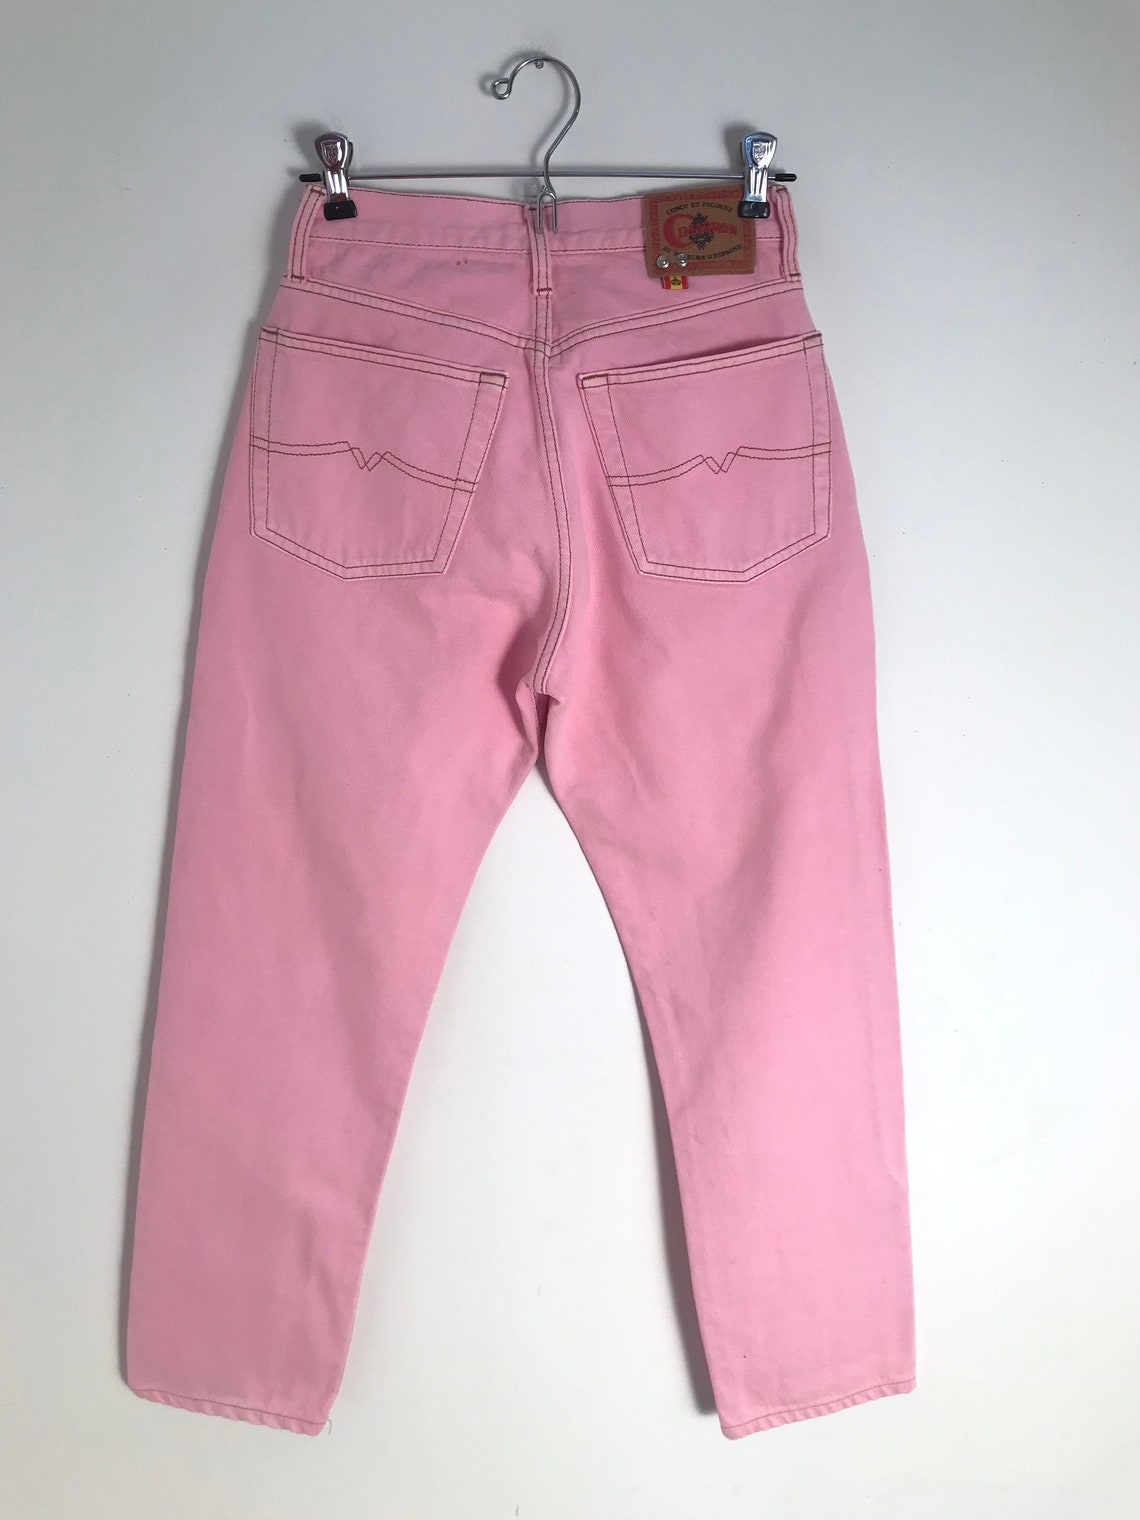 Vintage pink mom jeans with high waist and tapered leg / xs / | Etsy